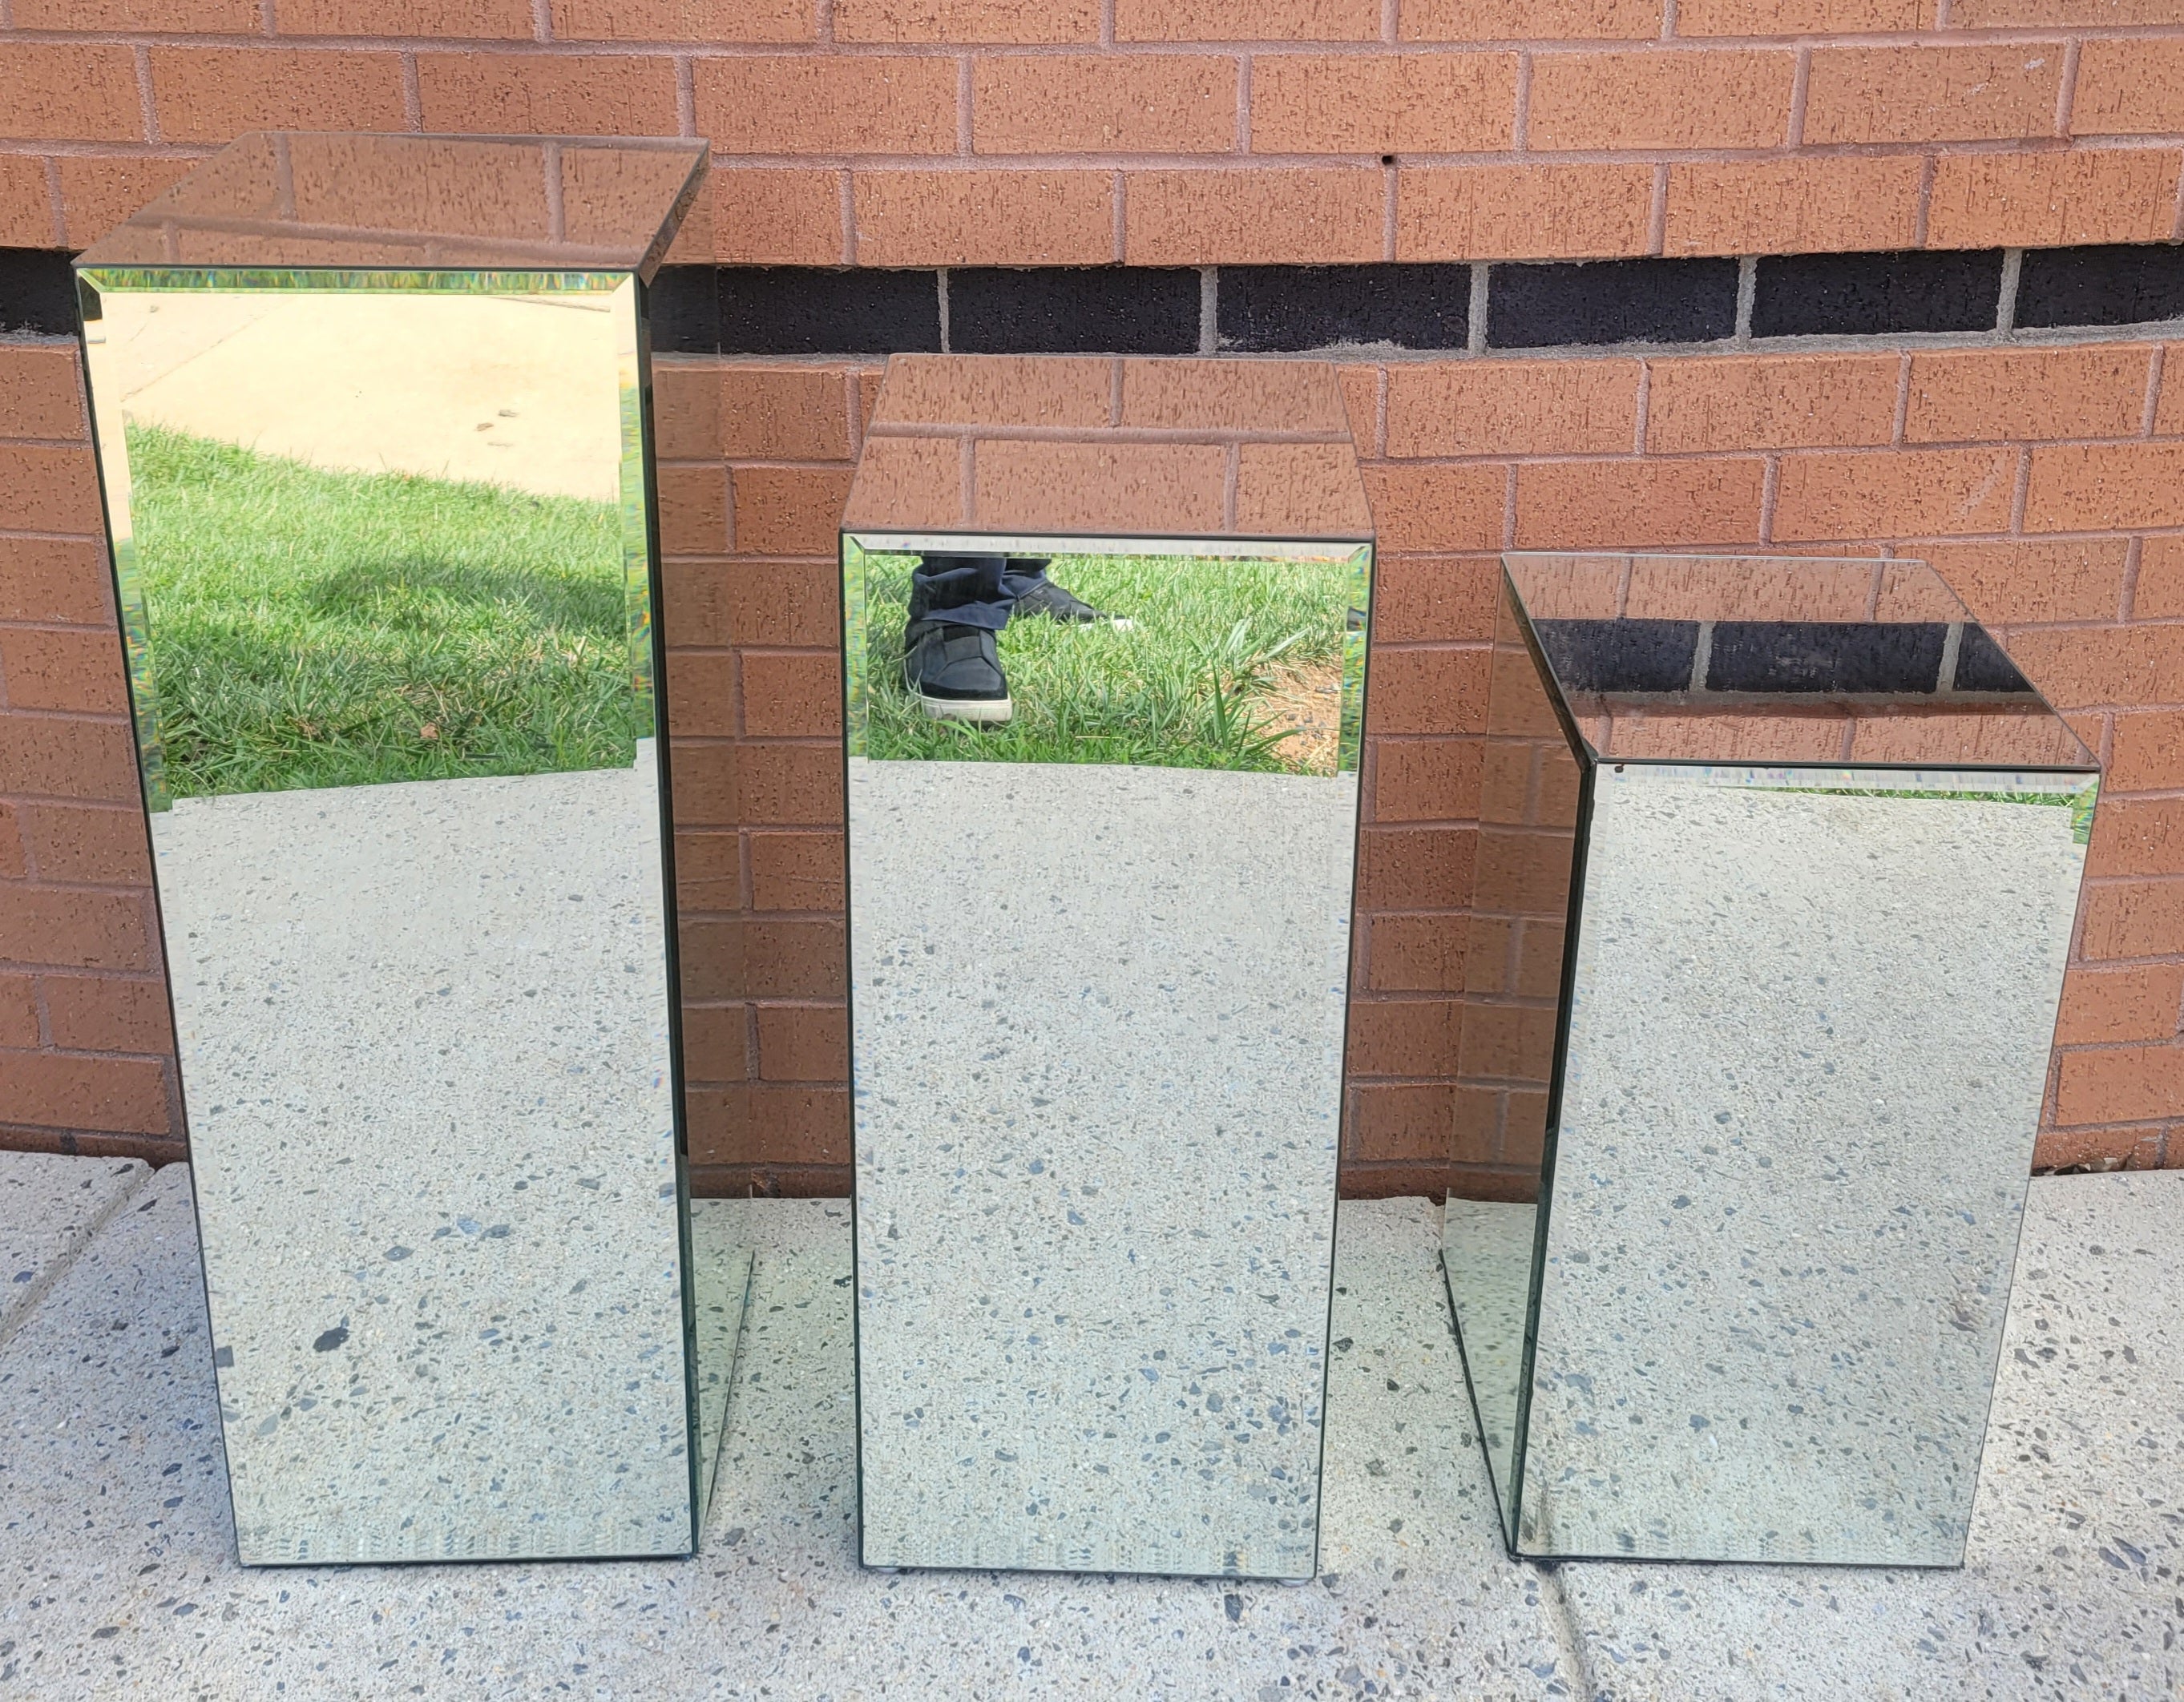 This pedestal is mirrored on all four sides and also the top. Each pane is beveled. Use them as plant stands.
They are perfect for displaying sculptures or valuable vases. 
Tallest one measures 12.25